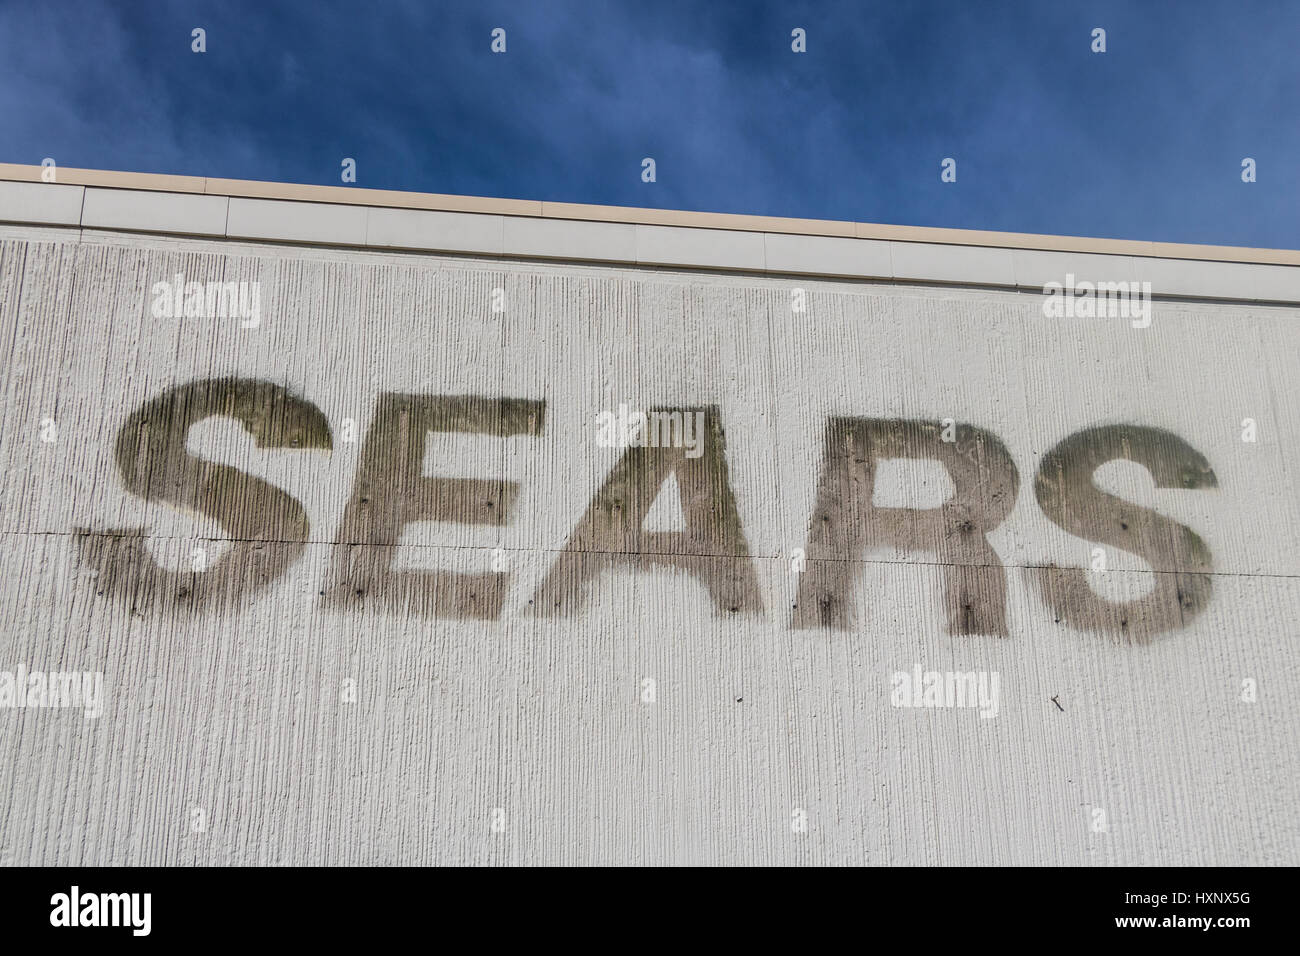 Kokomo - Circa March 2017: Recently shuttered Sears Retail Mall Location. According to a regulatory filing, Sears Holdings Corp. lost more than $2 bil Stock Photo